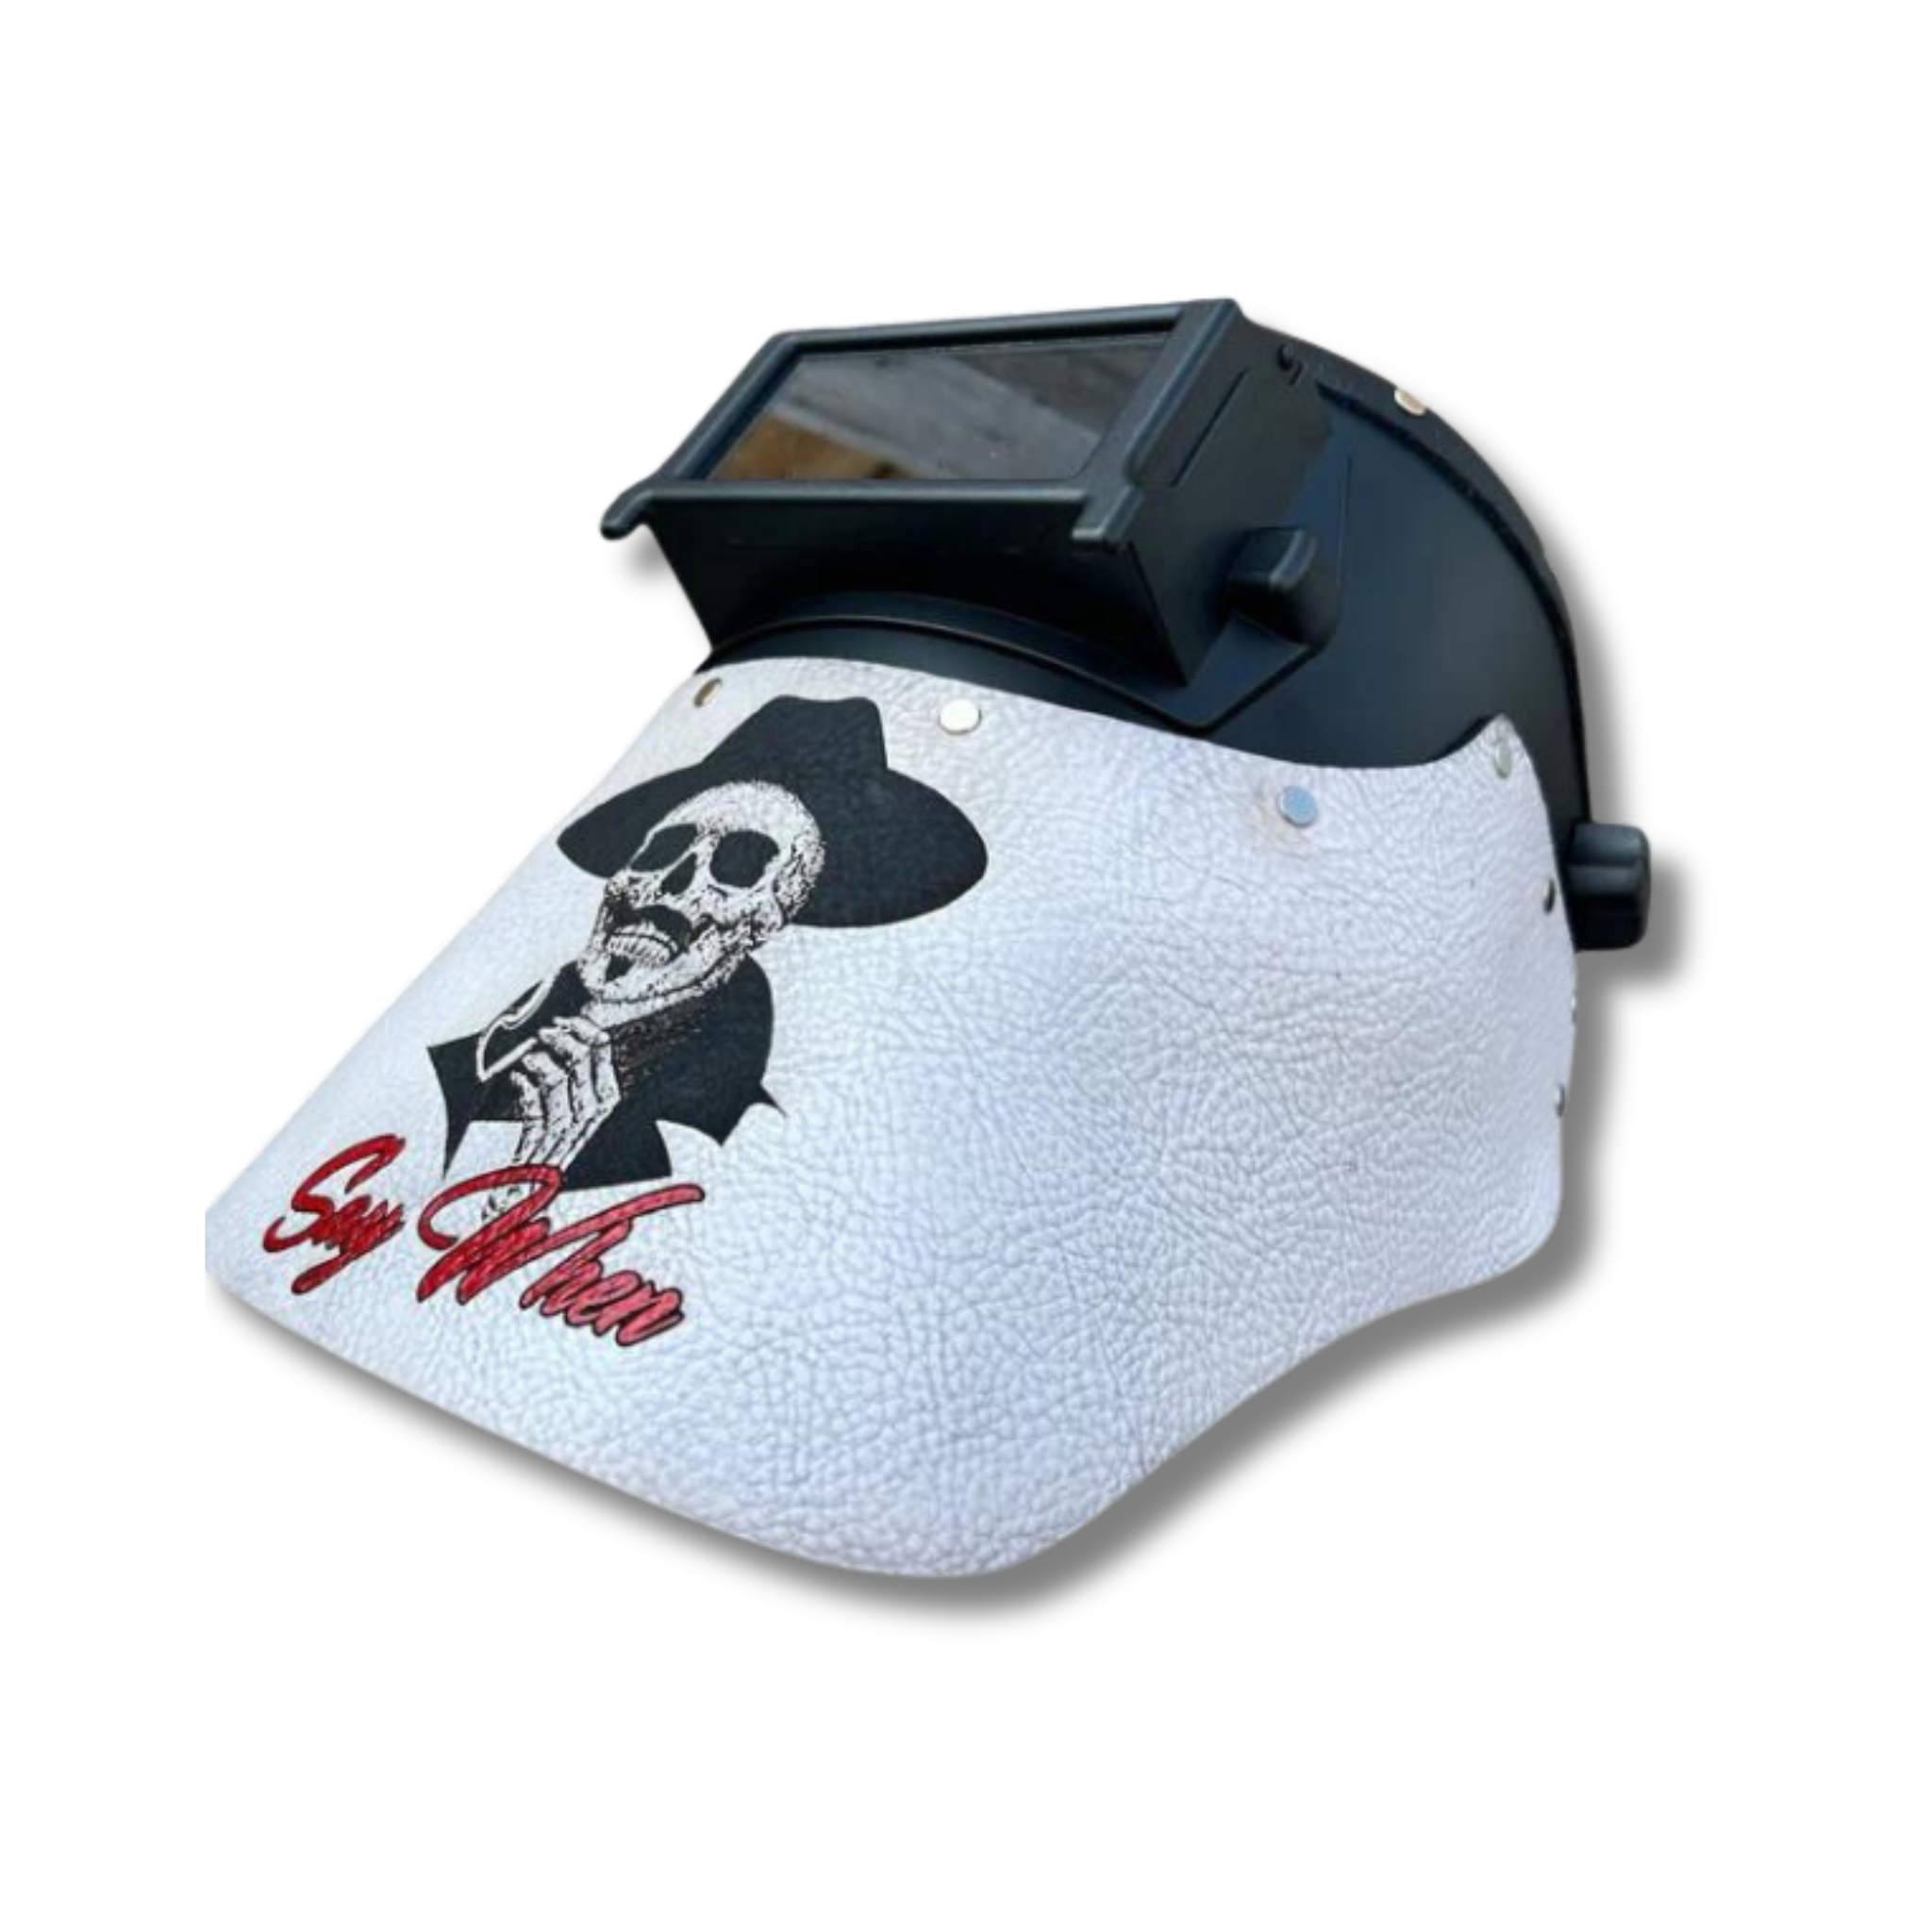 Outlaw Leather - Welding Hood - Say When Skull